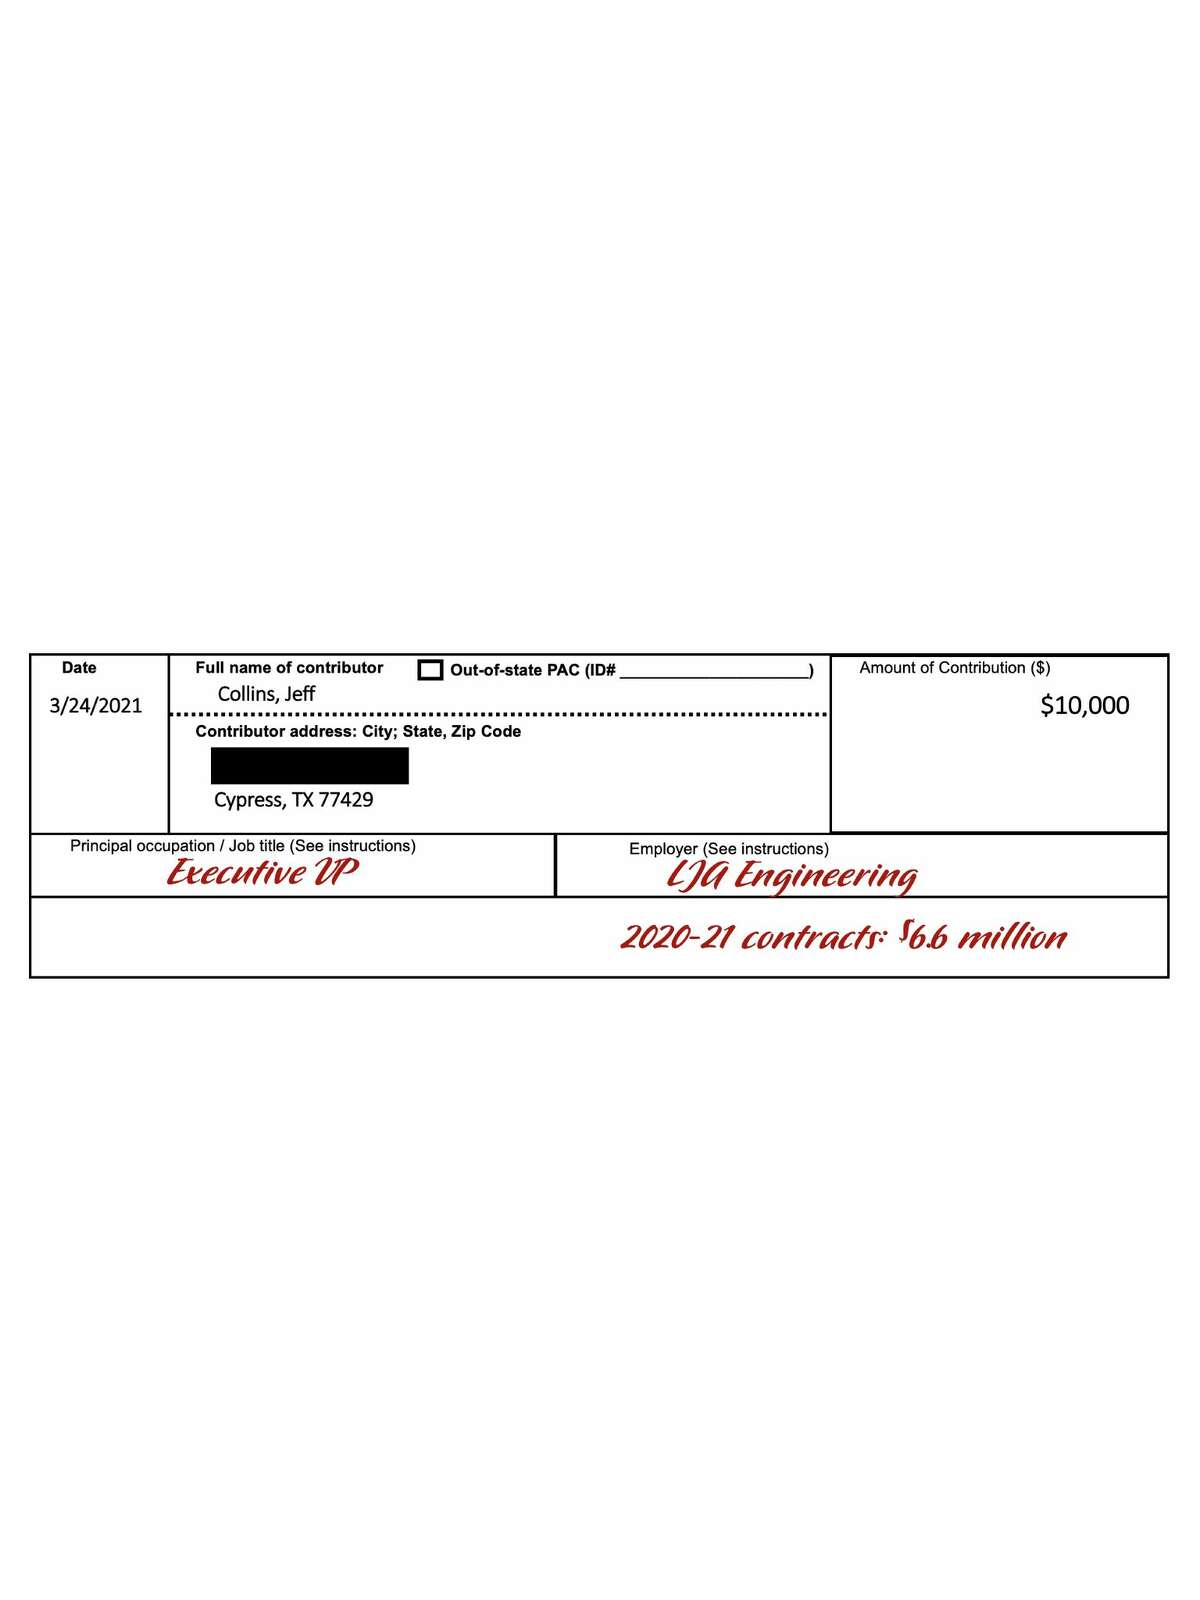 Sam campaign contribution form filled out with actual company name and contribution amount